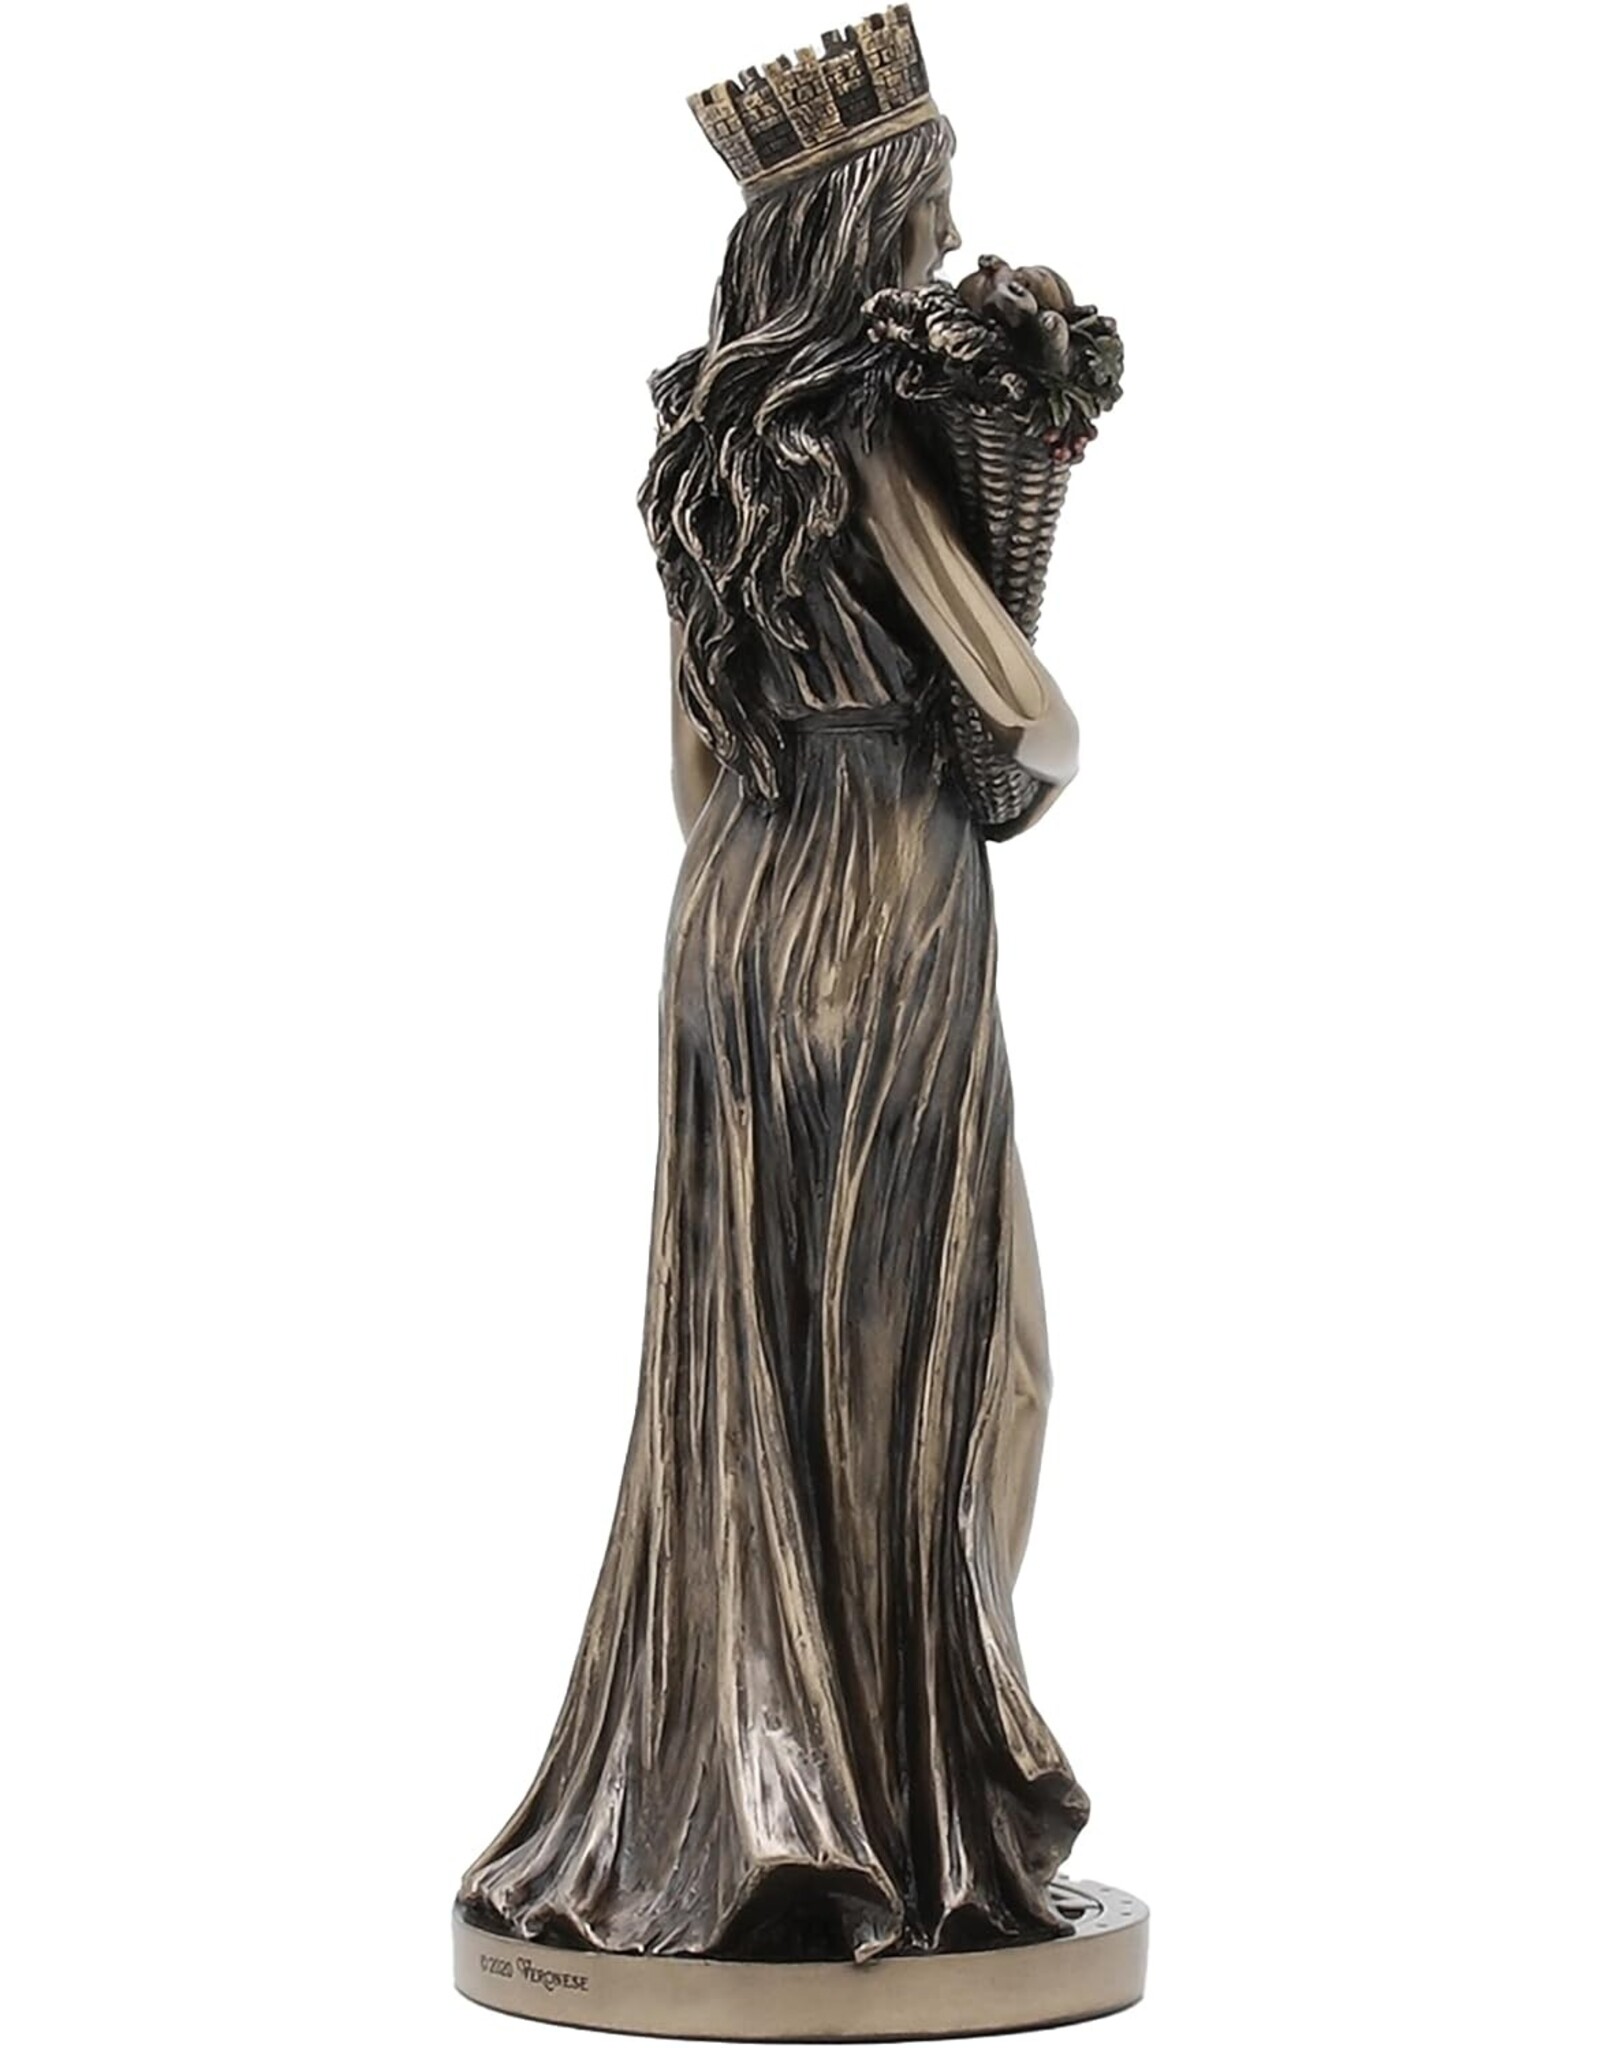 Veronese Design Giftware & Lifestyle - Tyche Greek Goddess of of Happiness, Fortune and Prosperity